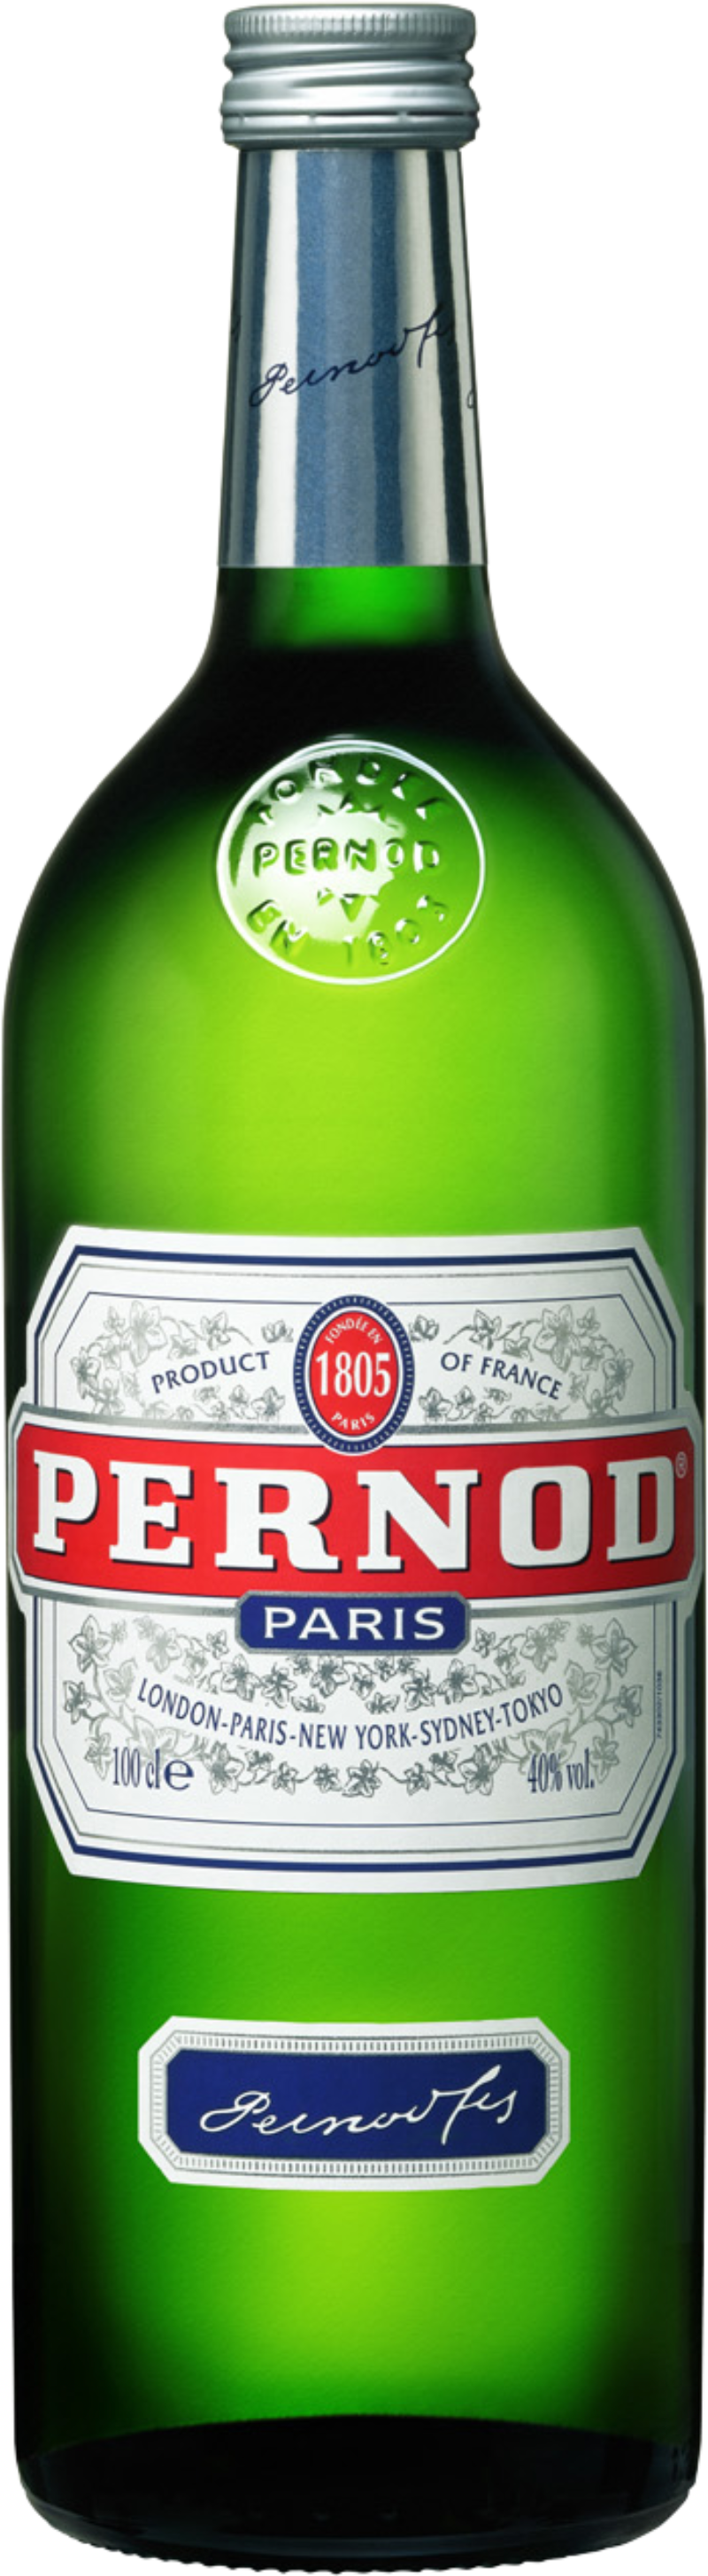 40% vol cl Pernod Anise - 100